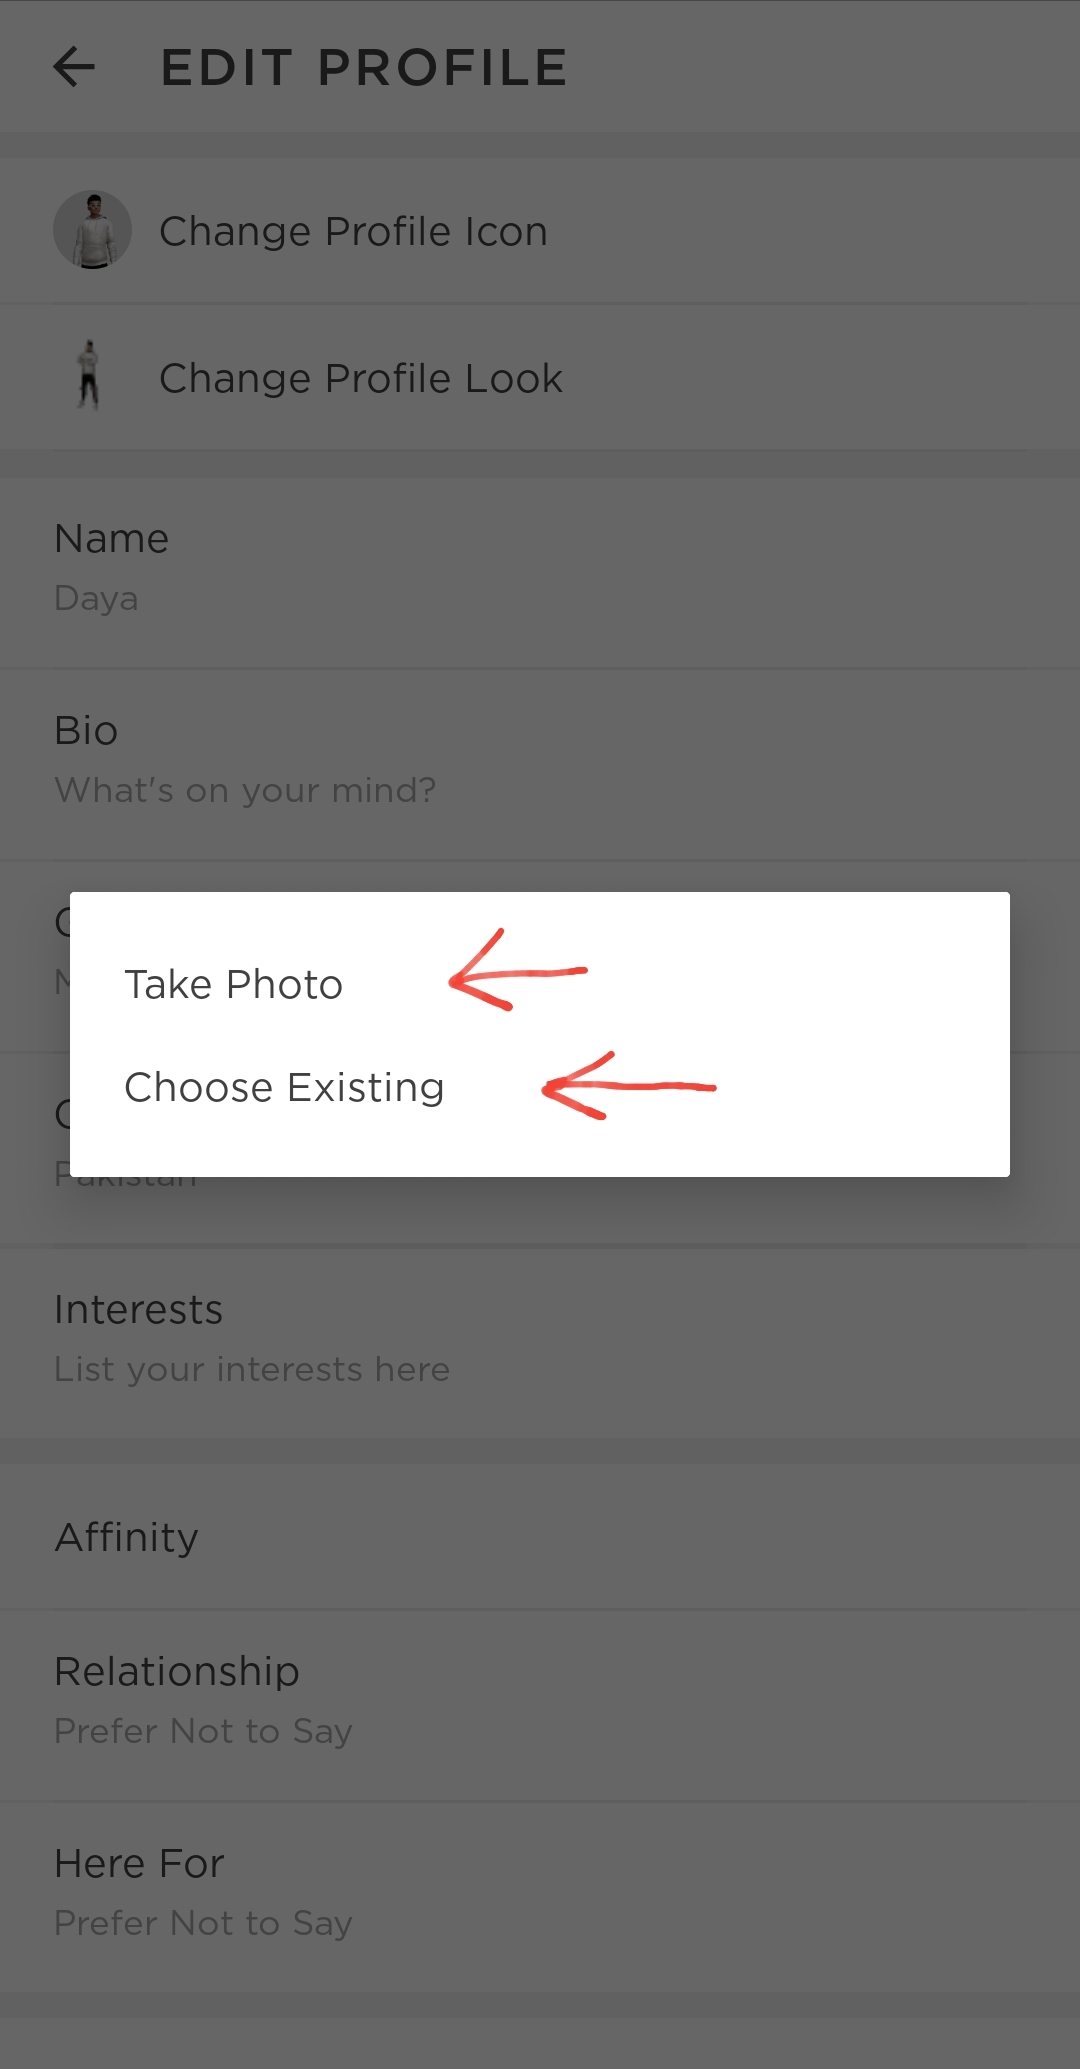 Take a picture 'or' Select Existing